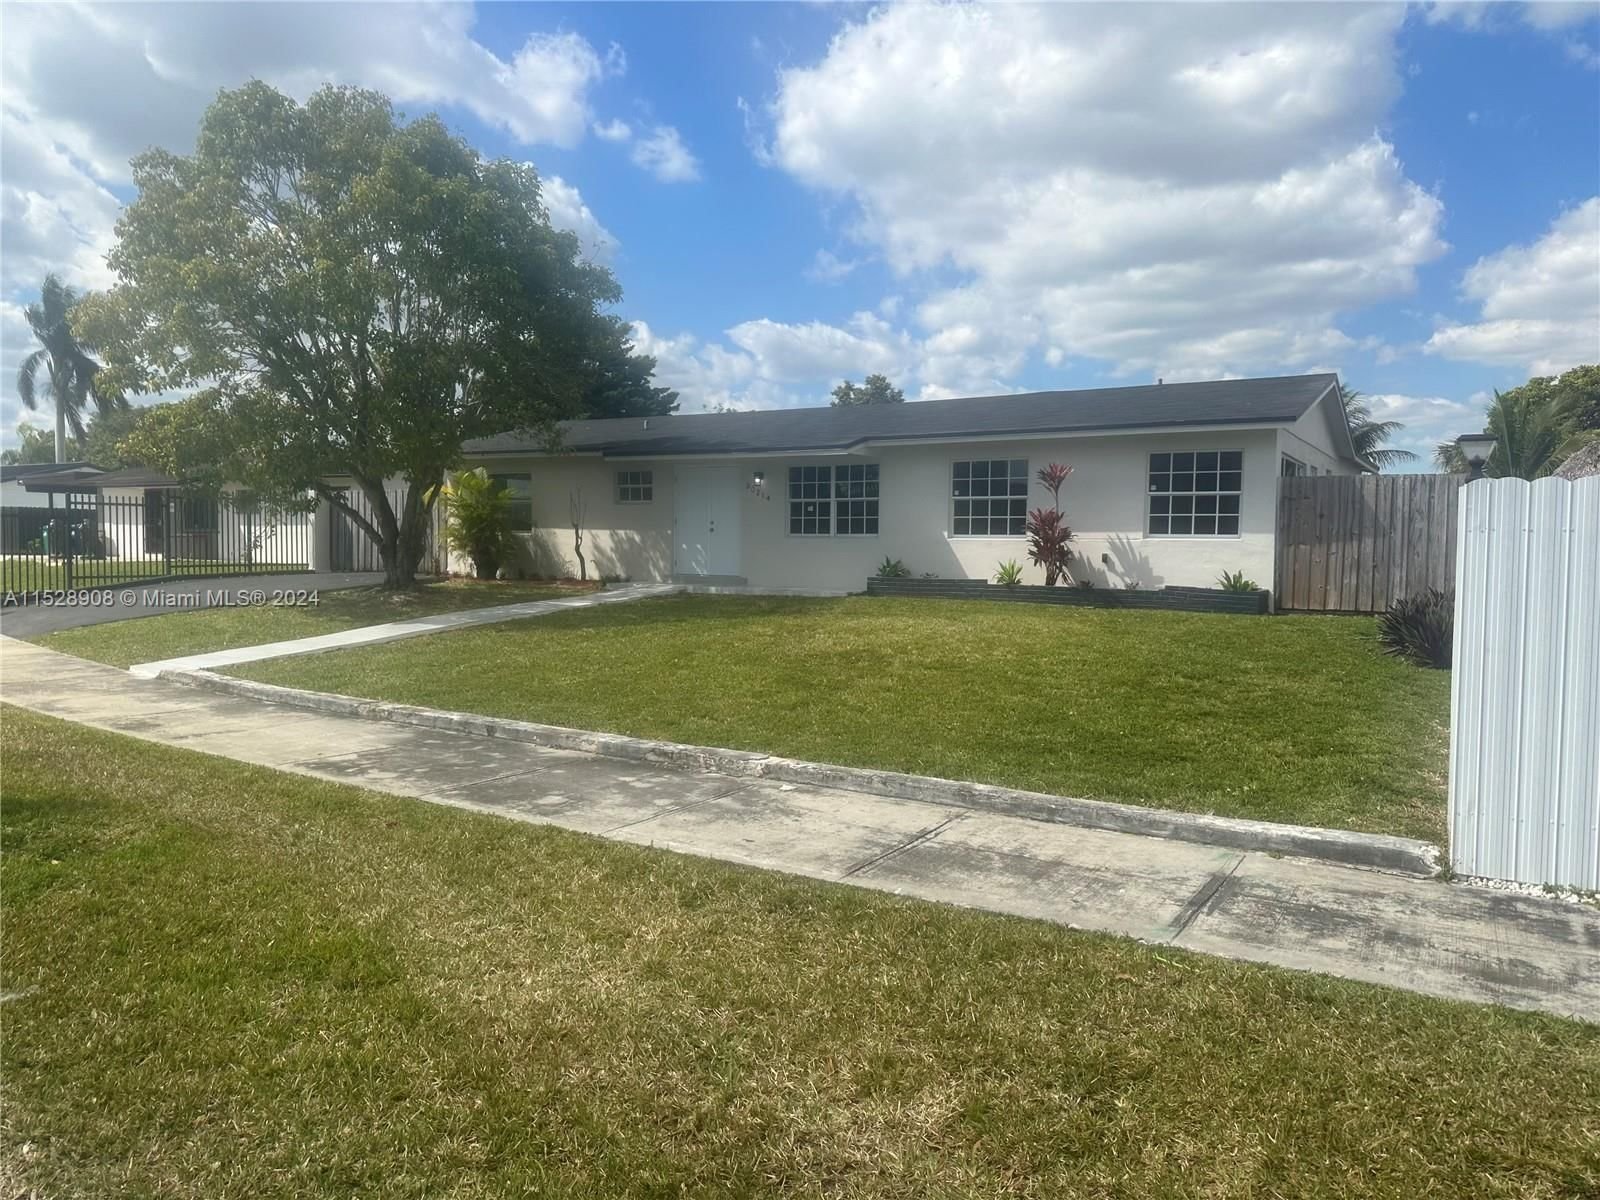 Real estate property located at 30214 154th Ct, Miami-Dade County, PALMLAND HOMES SOUTH NO 7, Homestead, FL